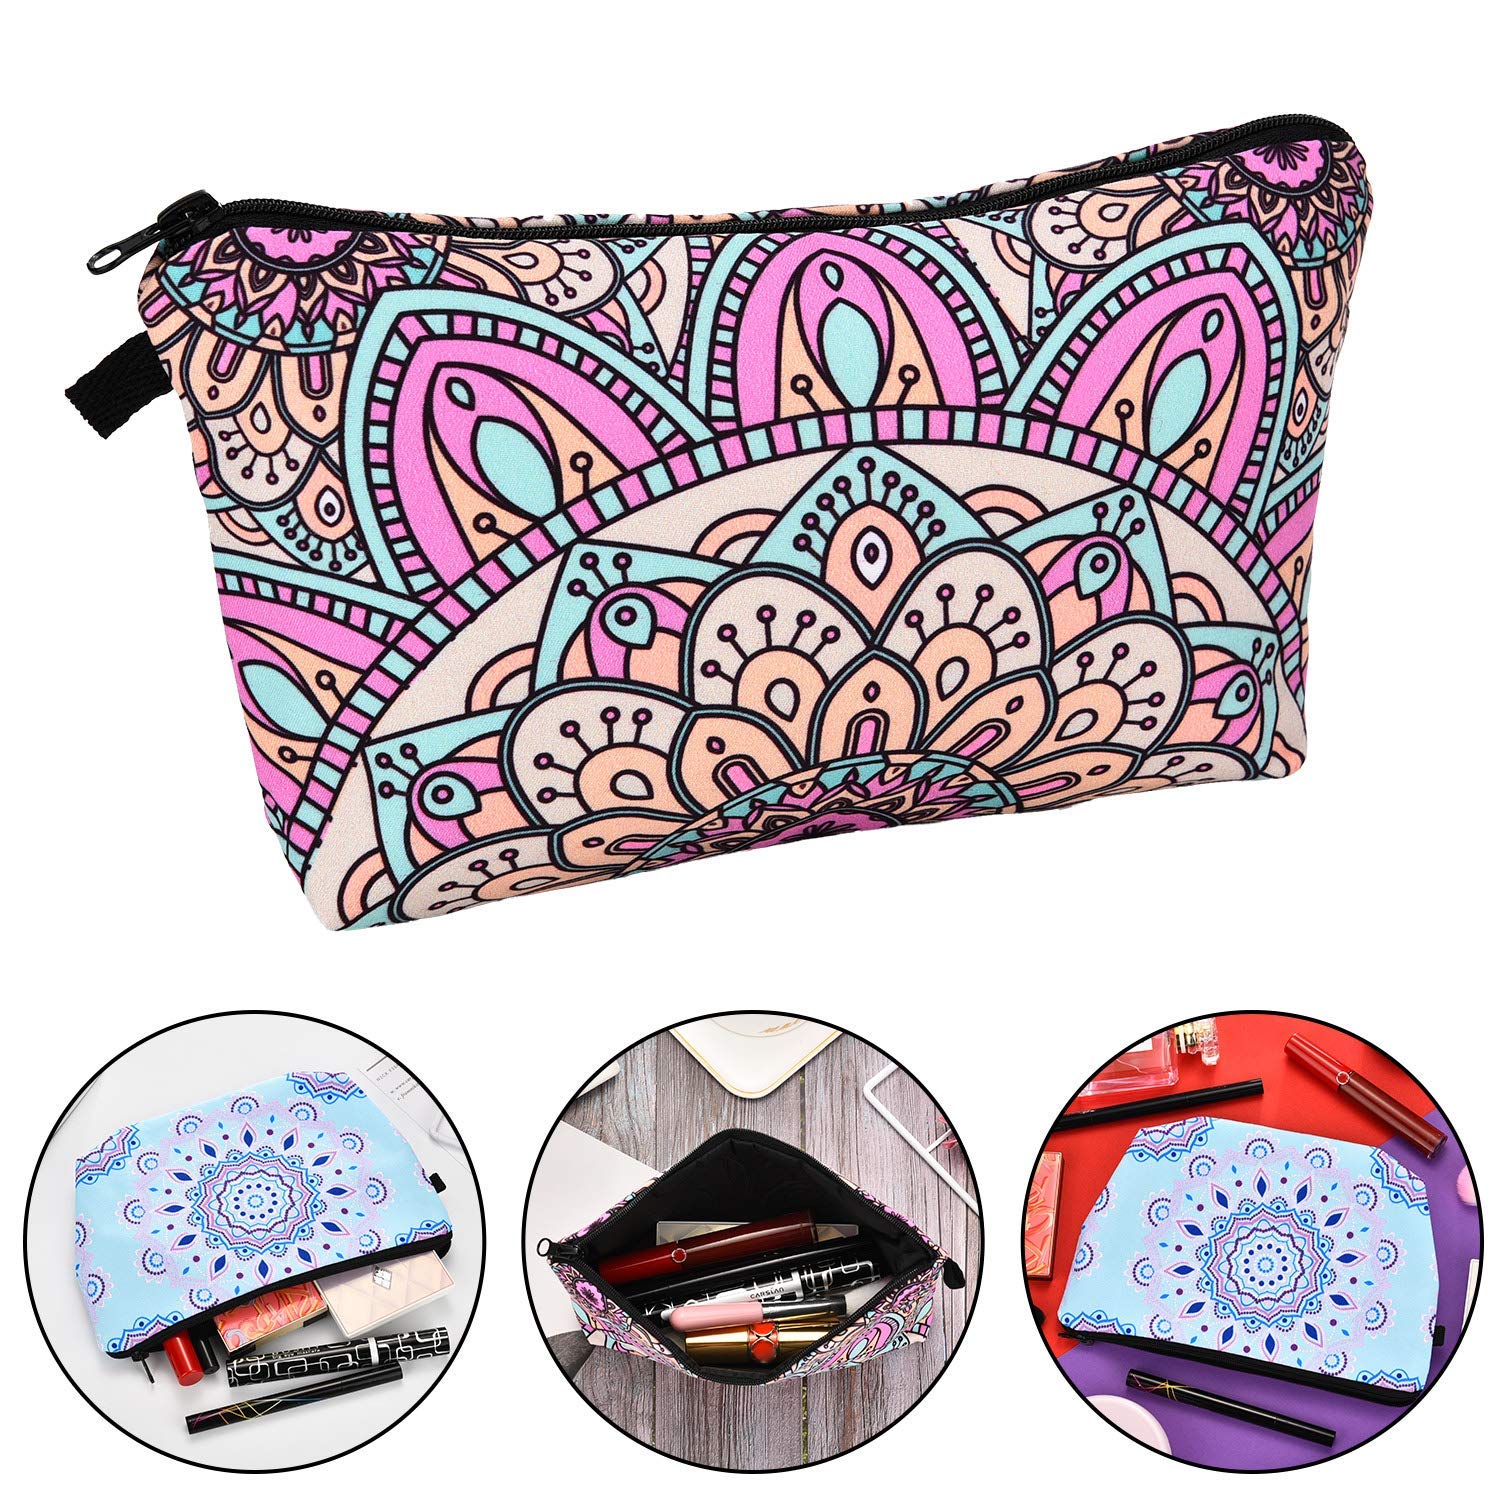 Chuangdi 6 Pieces Makeup Bag Toiletry Pouch Waterproof Cosmetic Bag with Zipper Travel Packing Bag 8.7 x 5.3 Inch Small Cosmetic Bag Accessory Organizer for Women and Men (Multicolor Style)